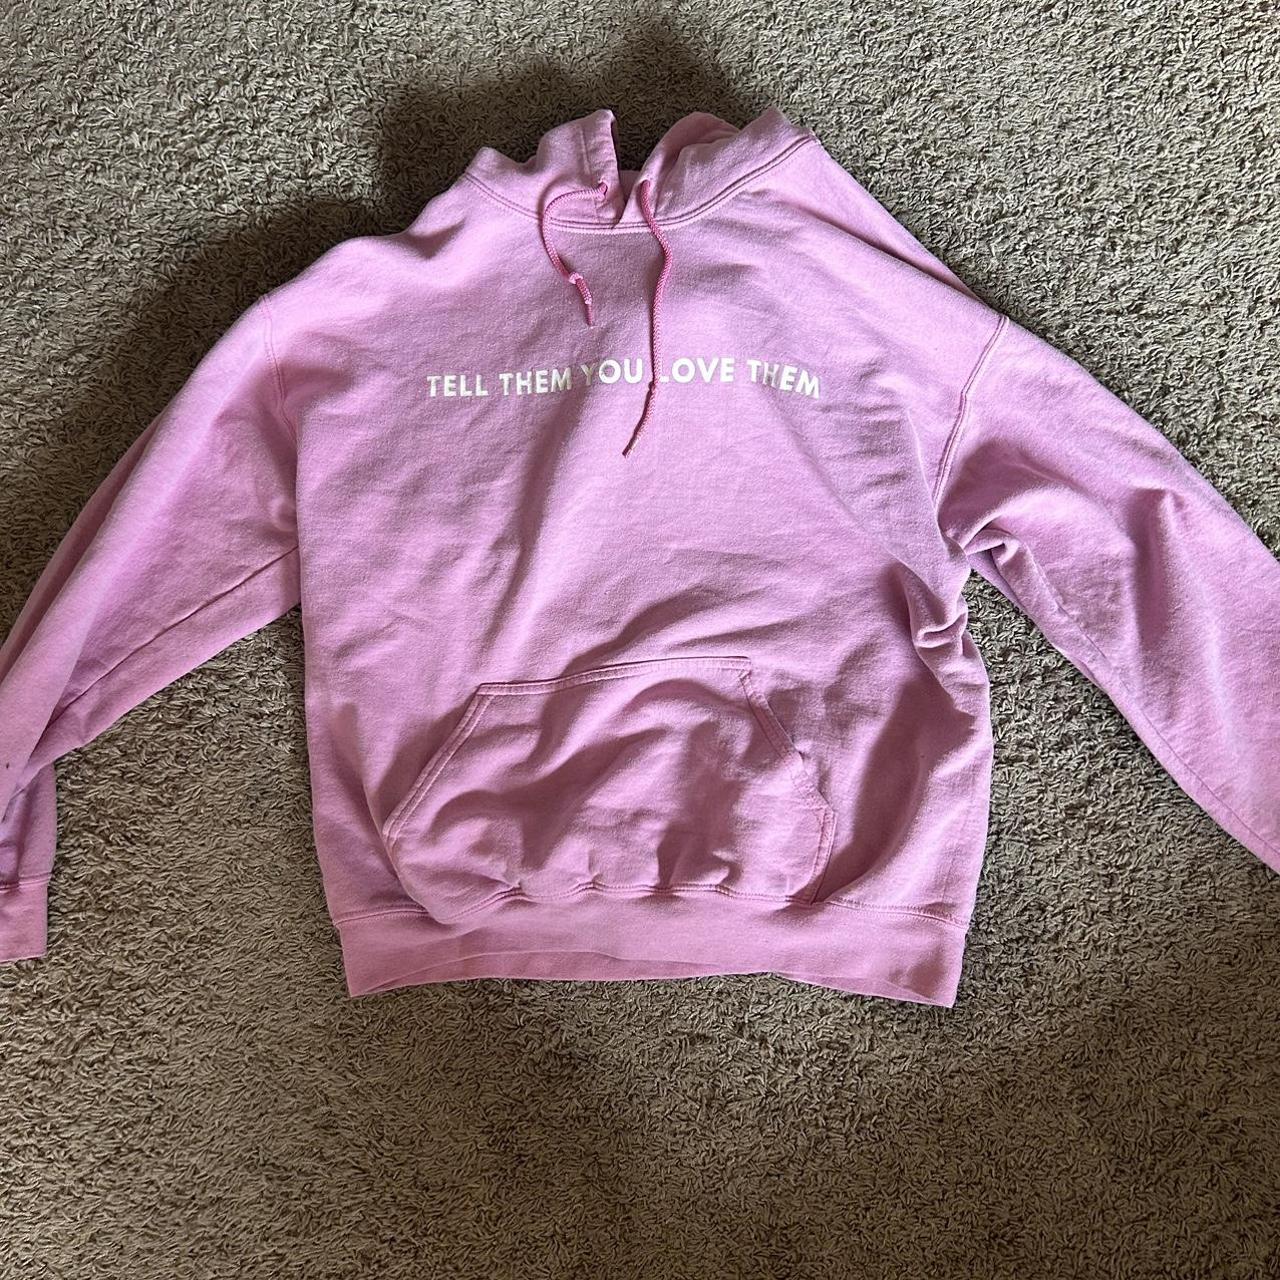 Urban Outfitters Women's Pink and Red Hoodie